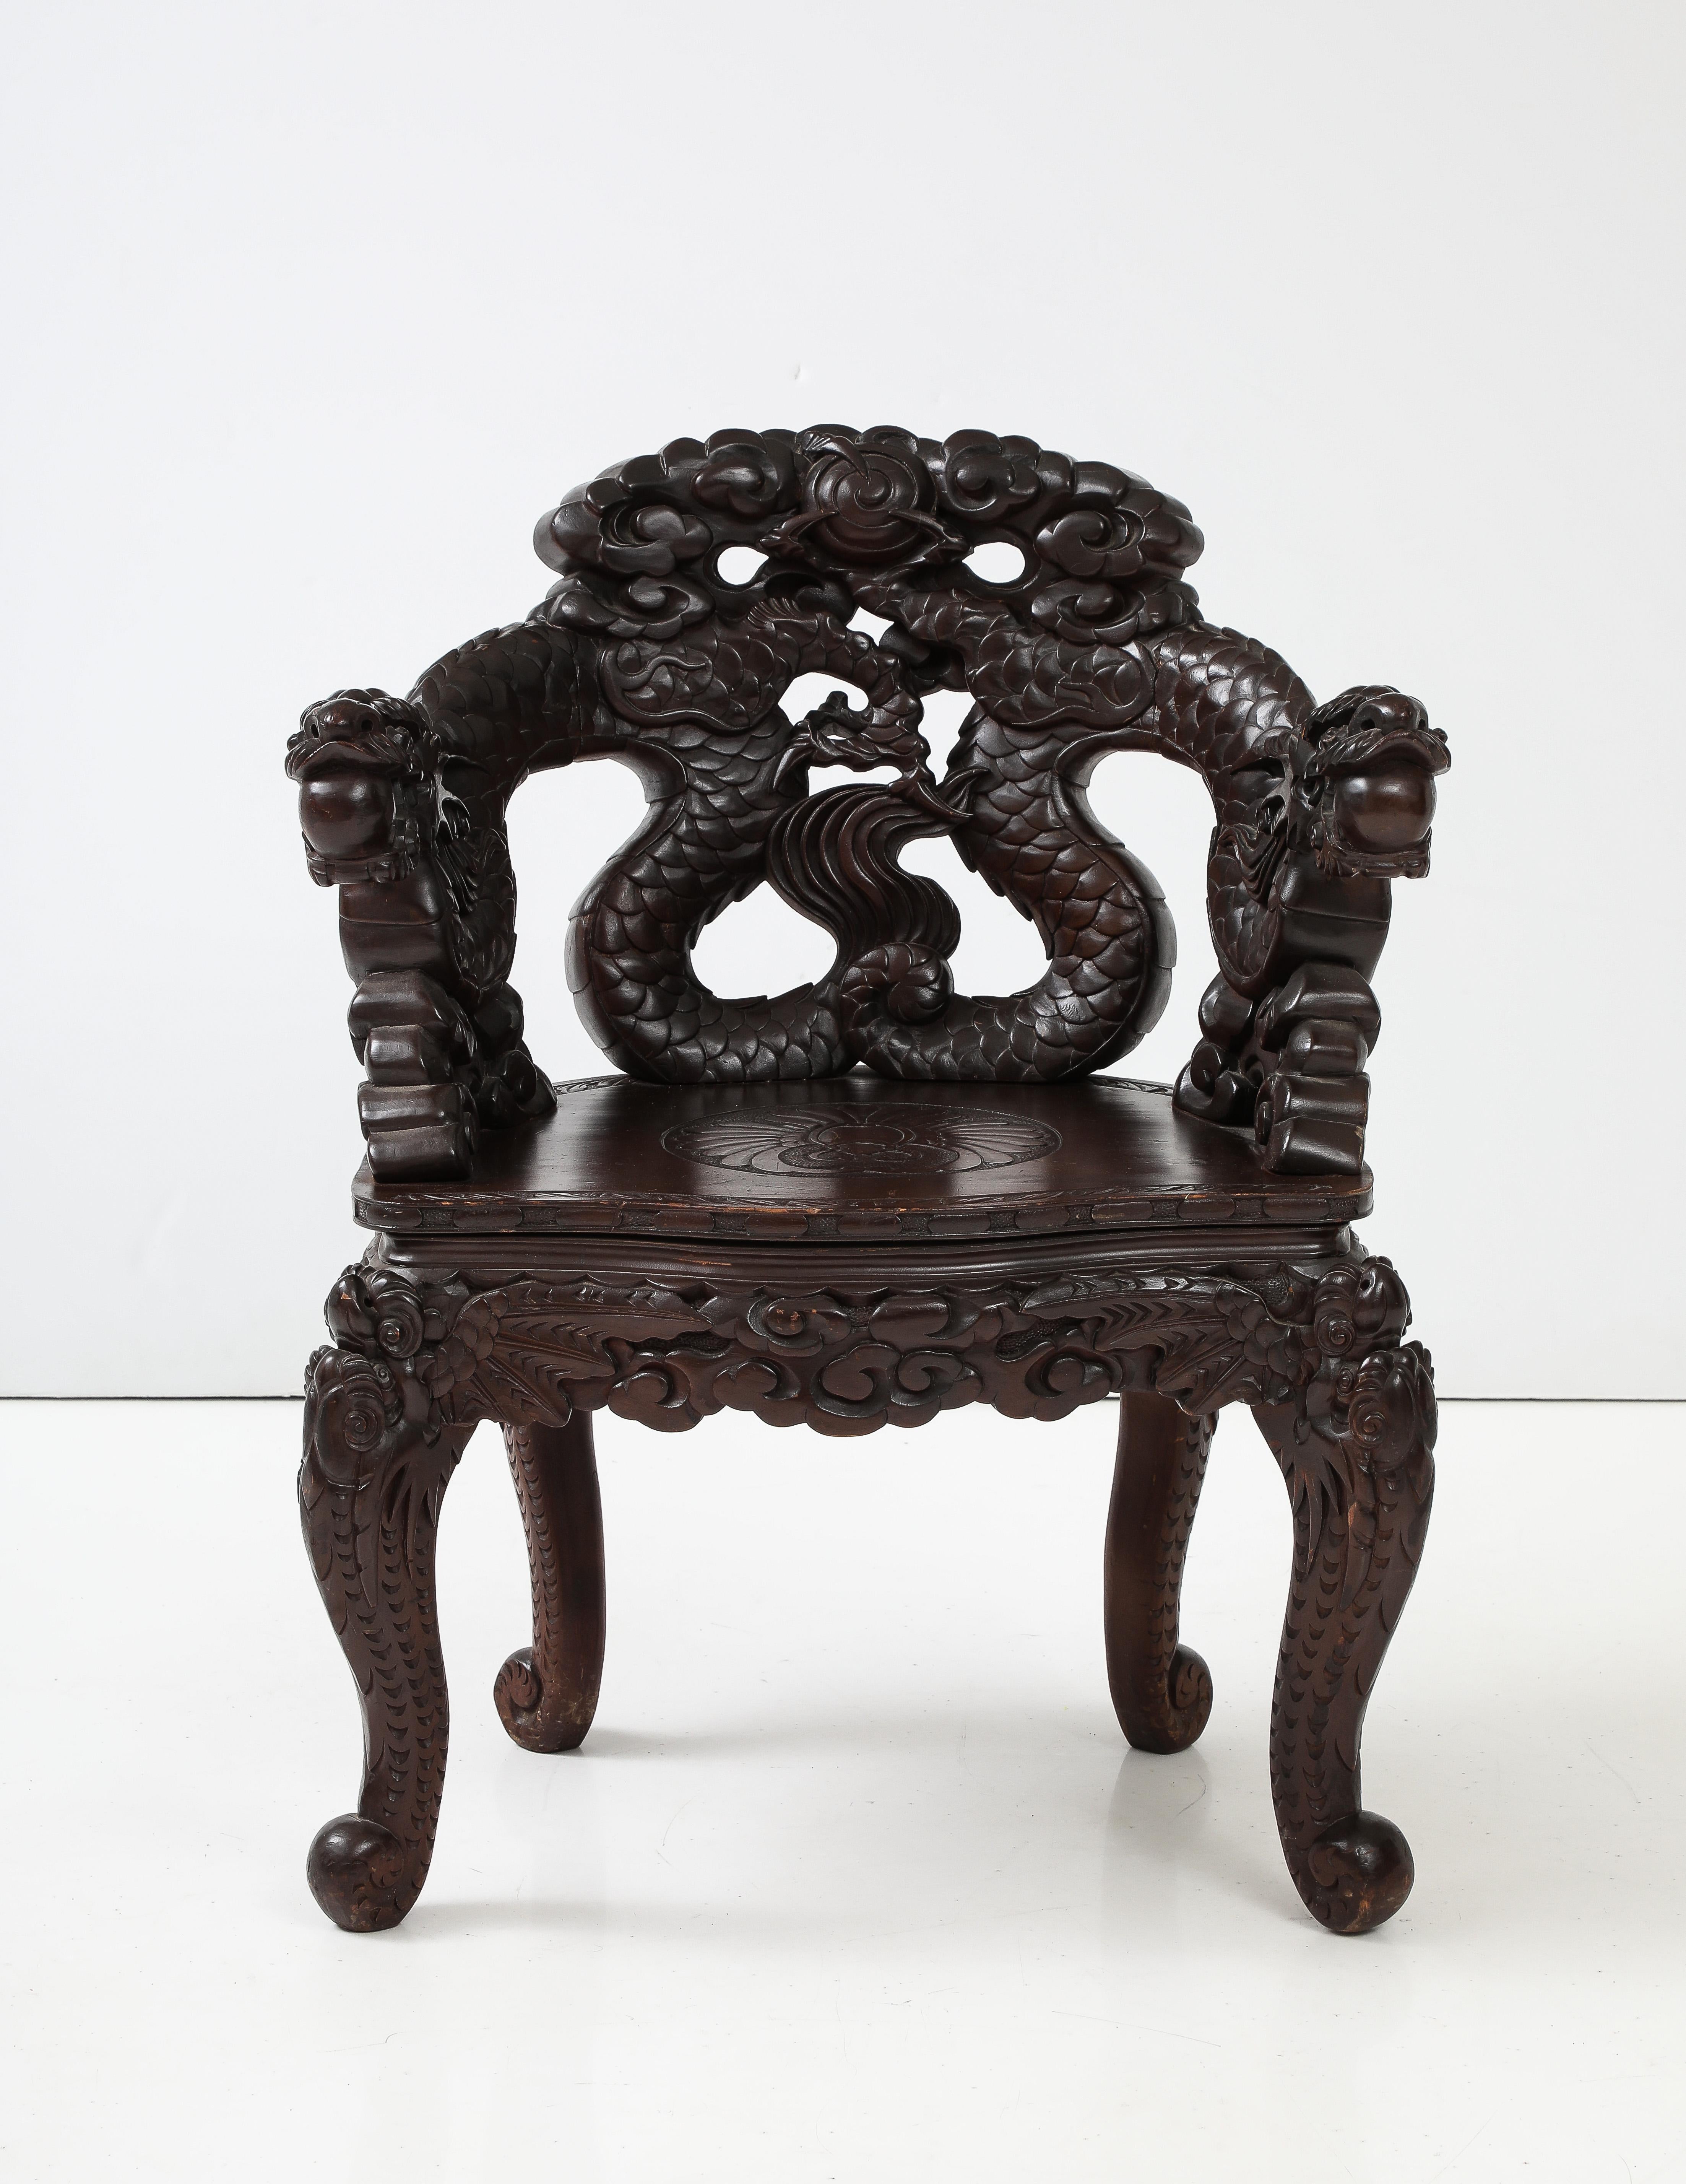 Eye catching highly carved sculptural dragon armchair. Japanese dragon motif carried throughout arms and chair with fantastic detailed hand carvings. Victorian era cabriole legs finish the design. 